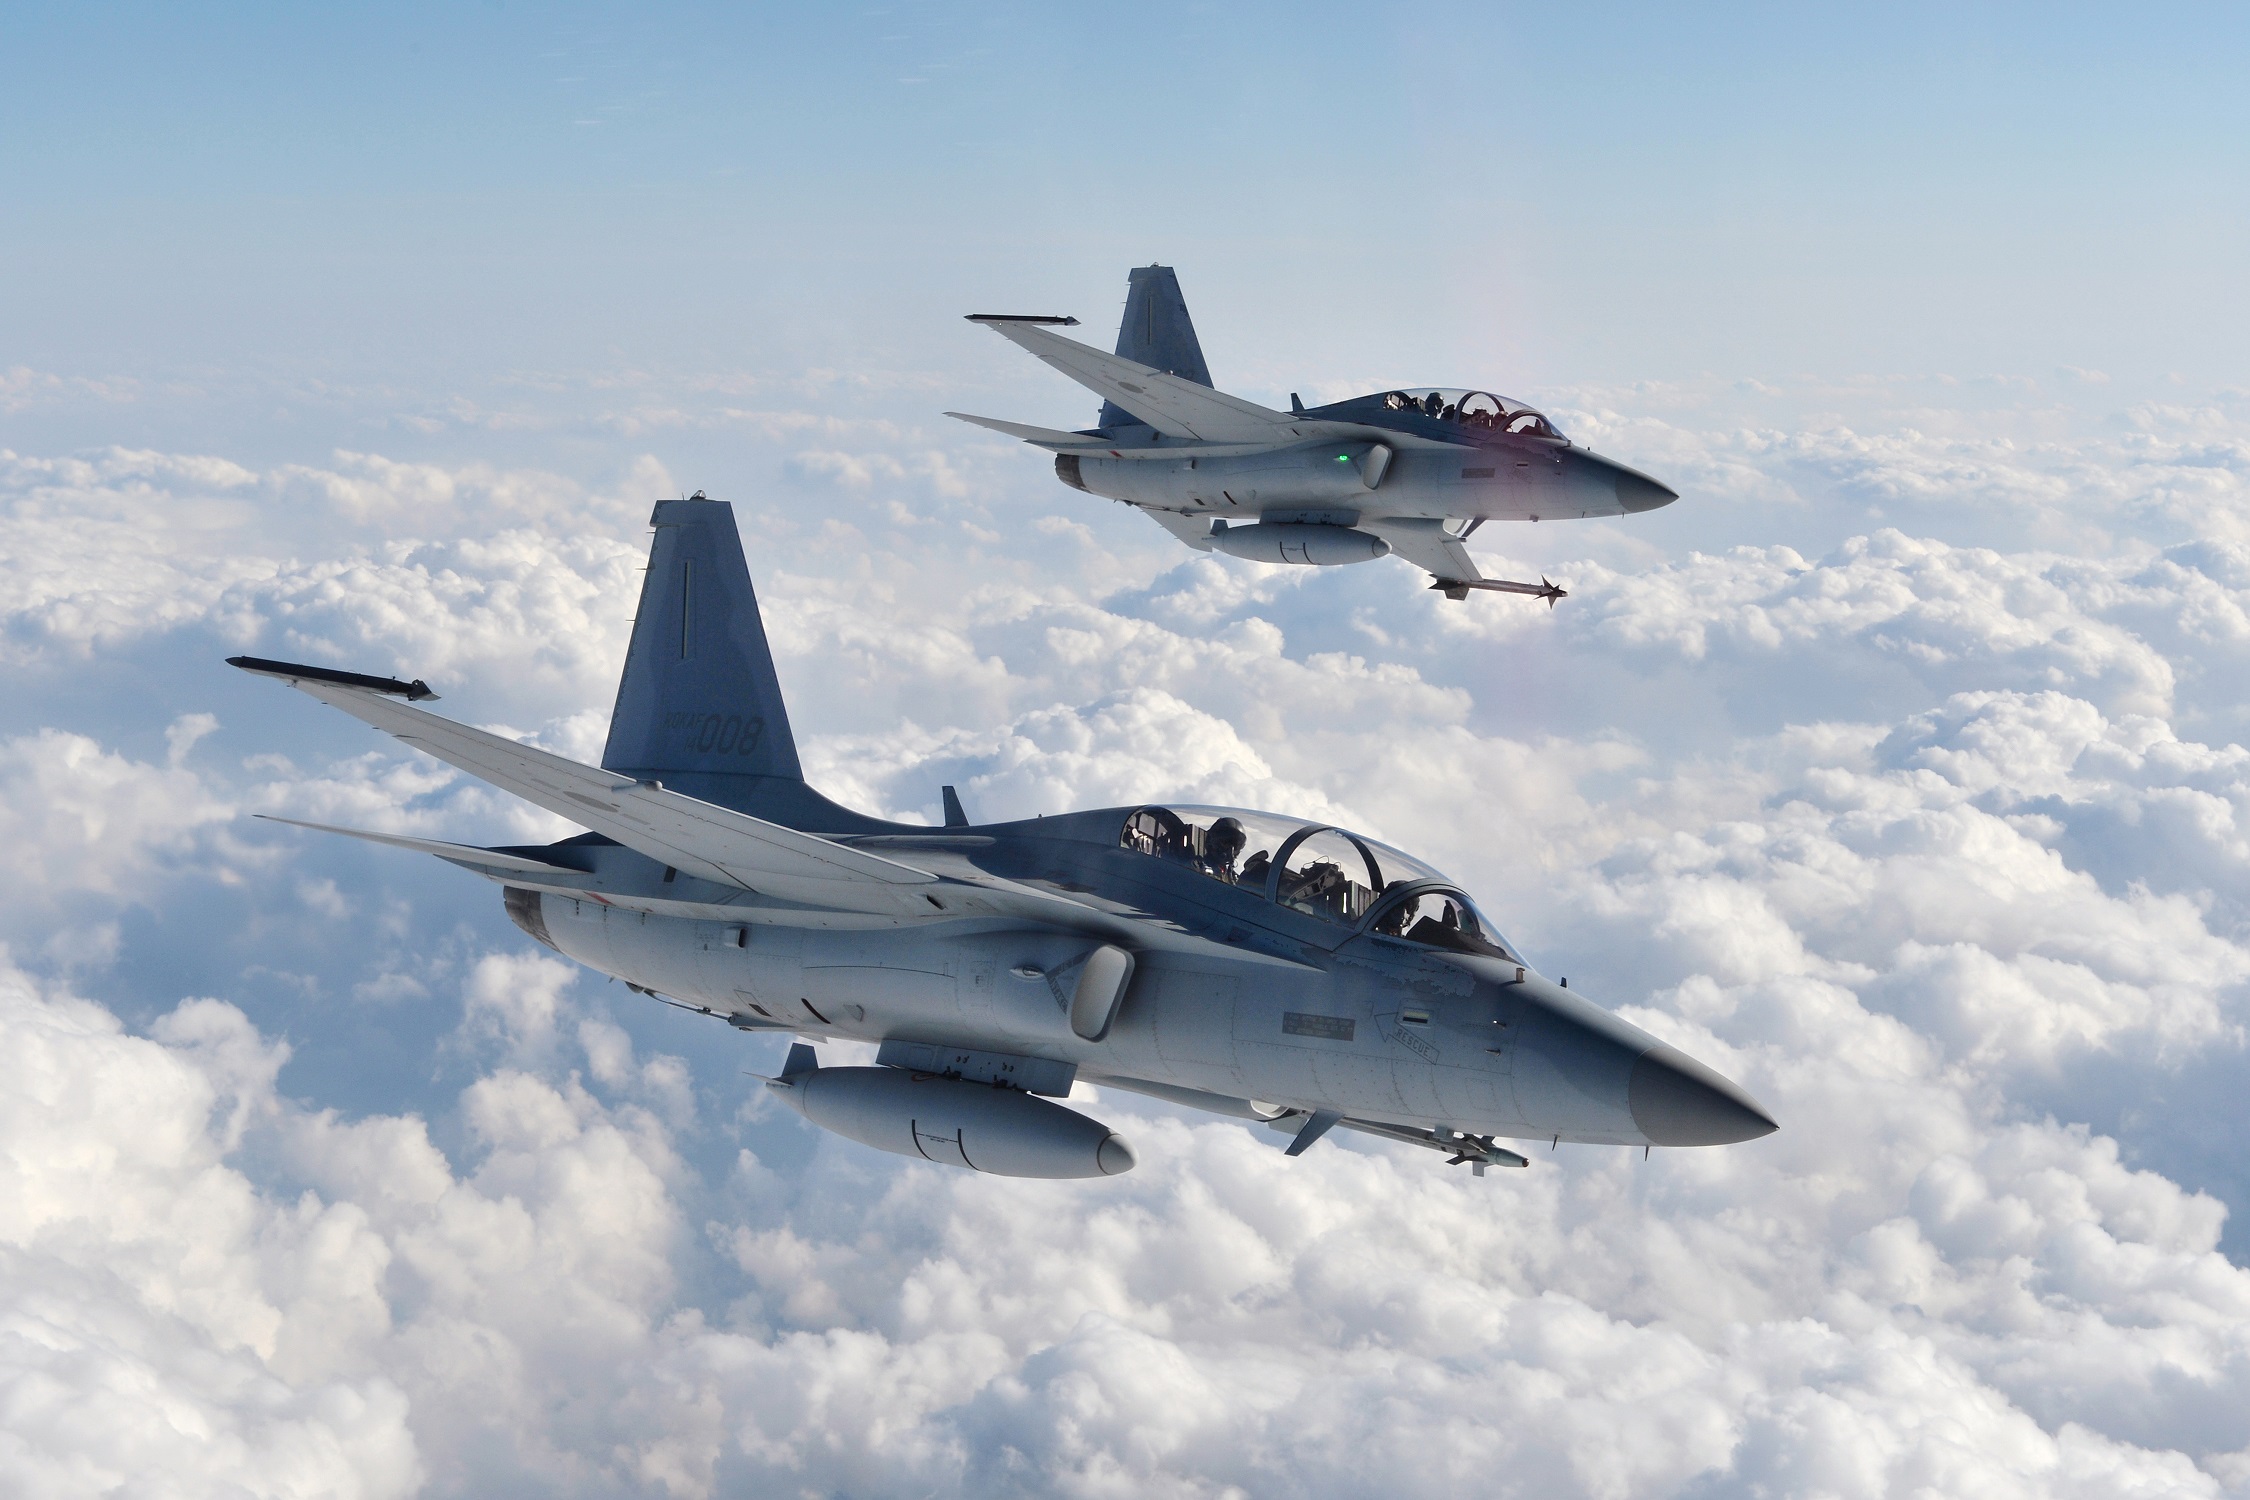 Itps Positions To Offer Lead In Fighter Training With Fa 50 Fleet Acquisition Skies Mag